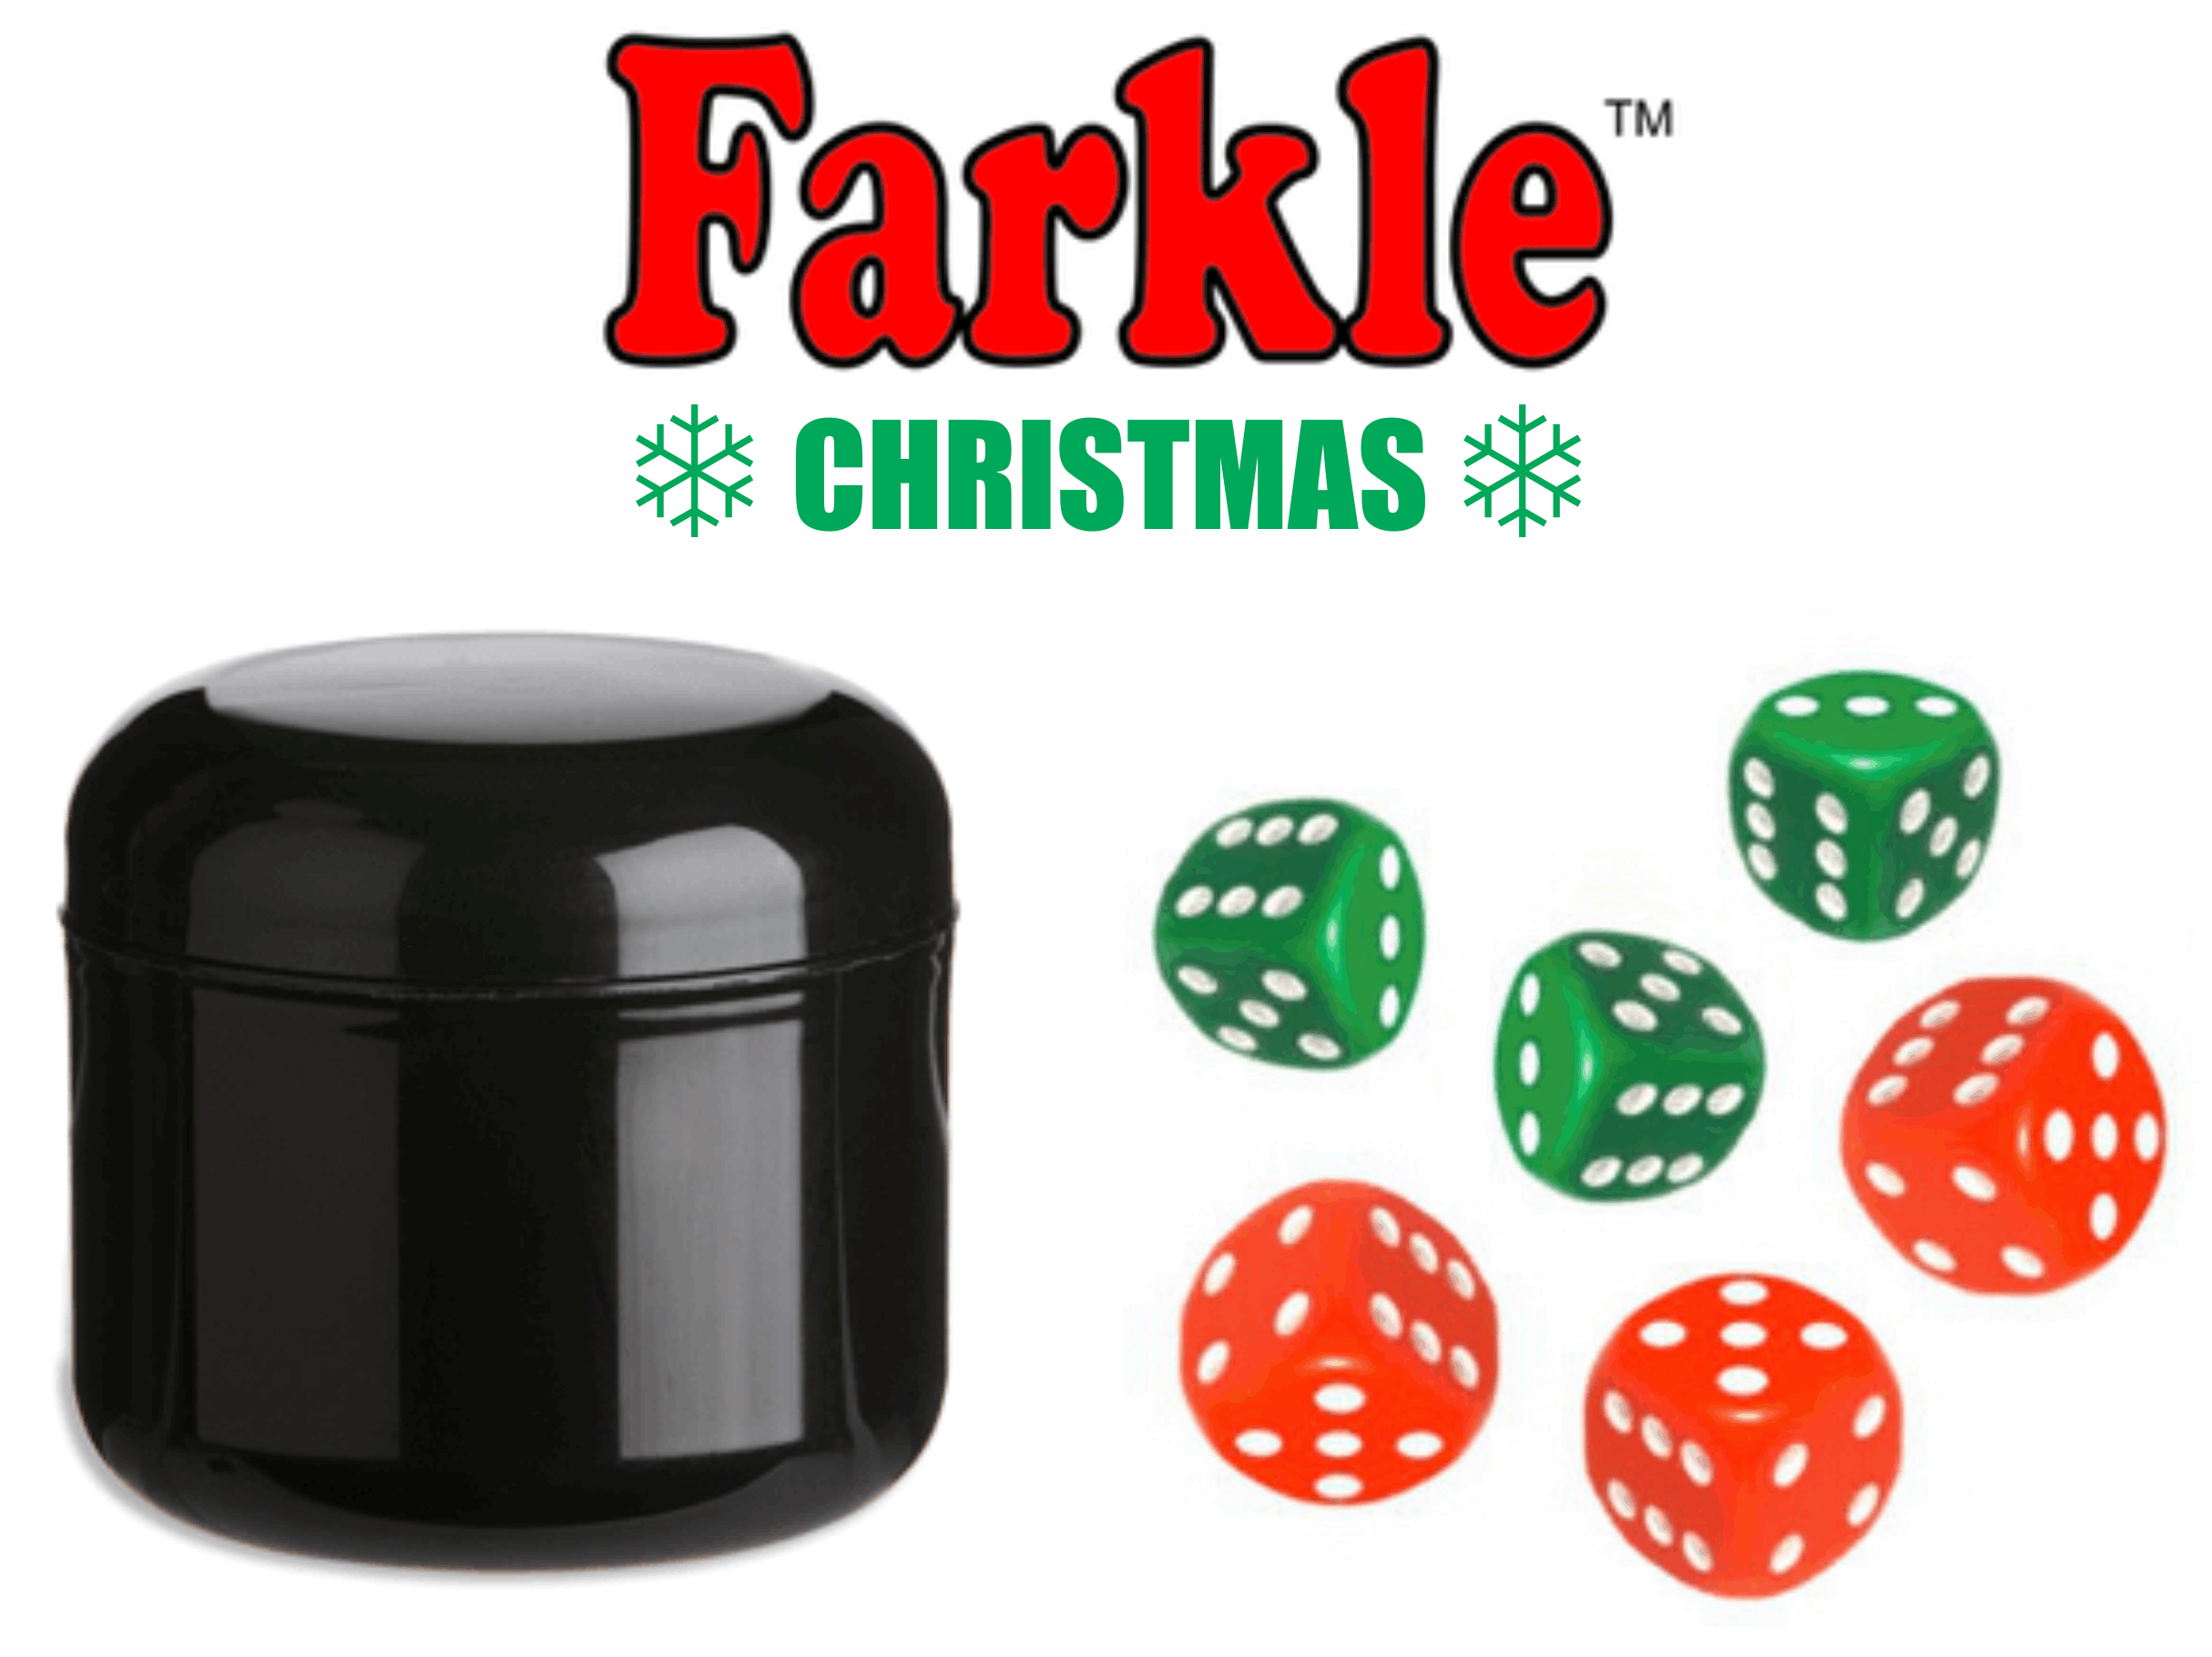 printable rules for farkle dice game